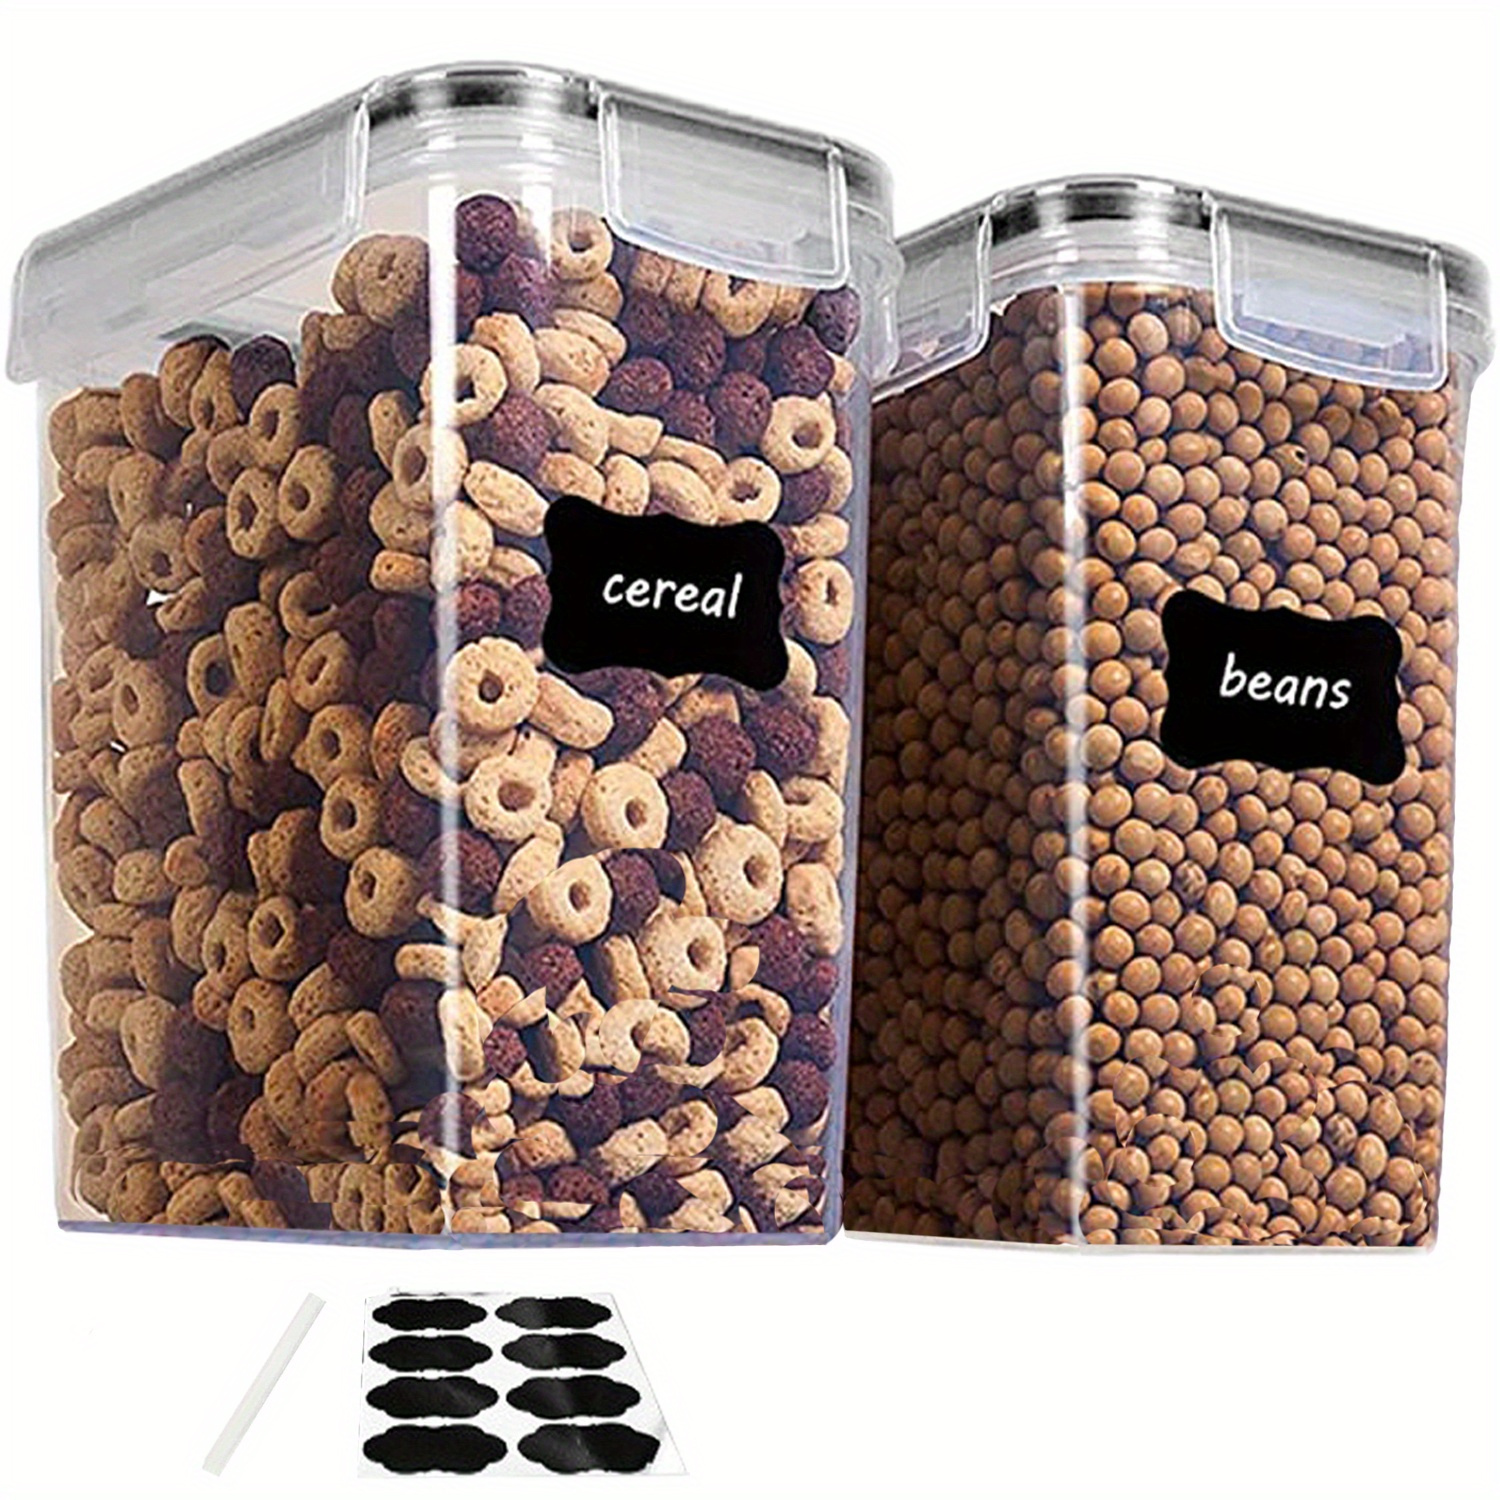 LeonDia 2 Packs Cereal Containers Storage, Airtight Food Storage Containers  with Lid, BPA-Free Pantry Organizers and Storage for Cereal Flour Sugar